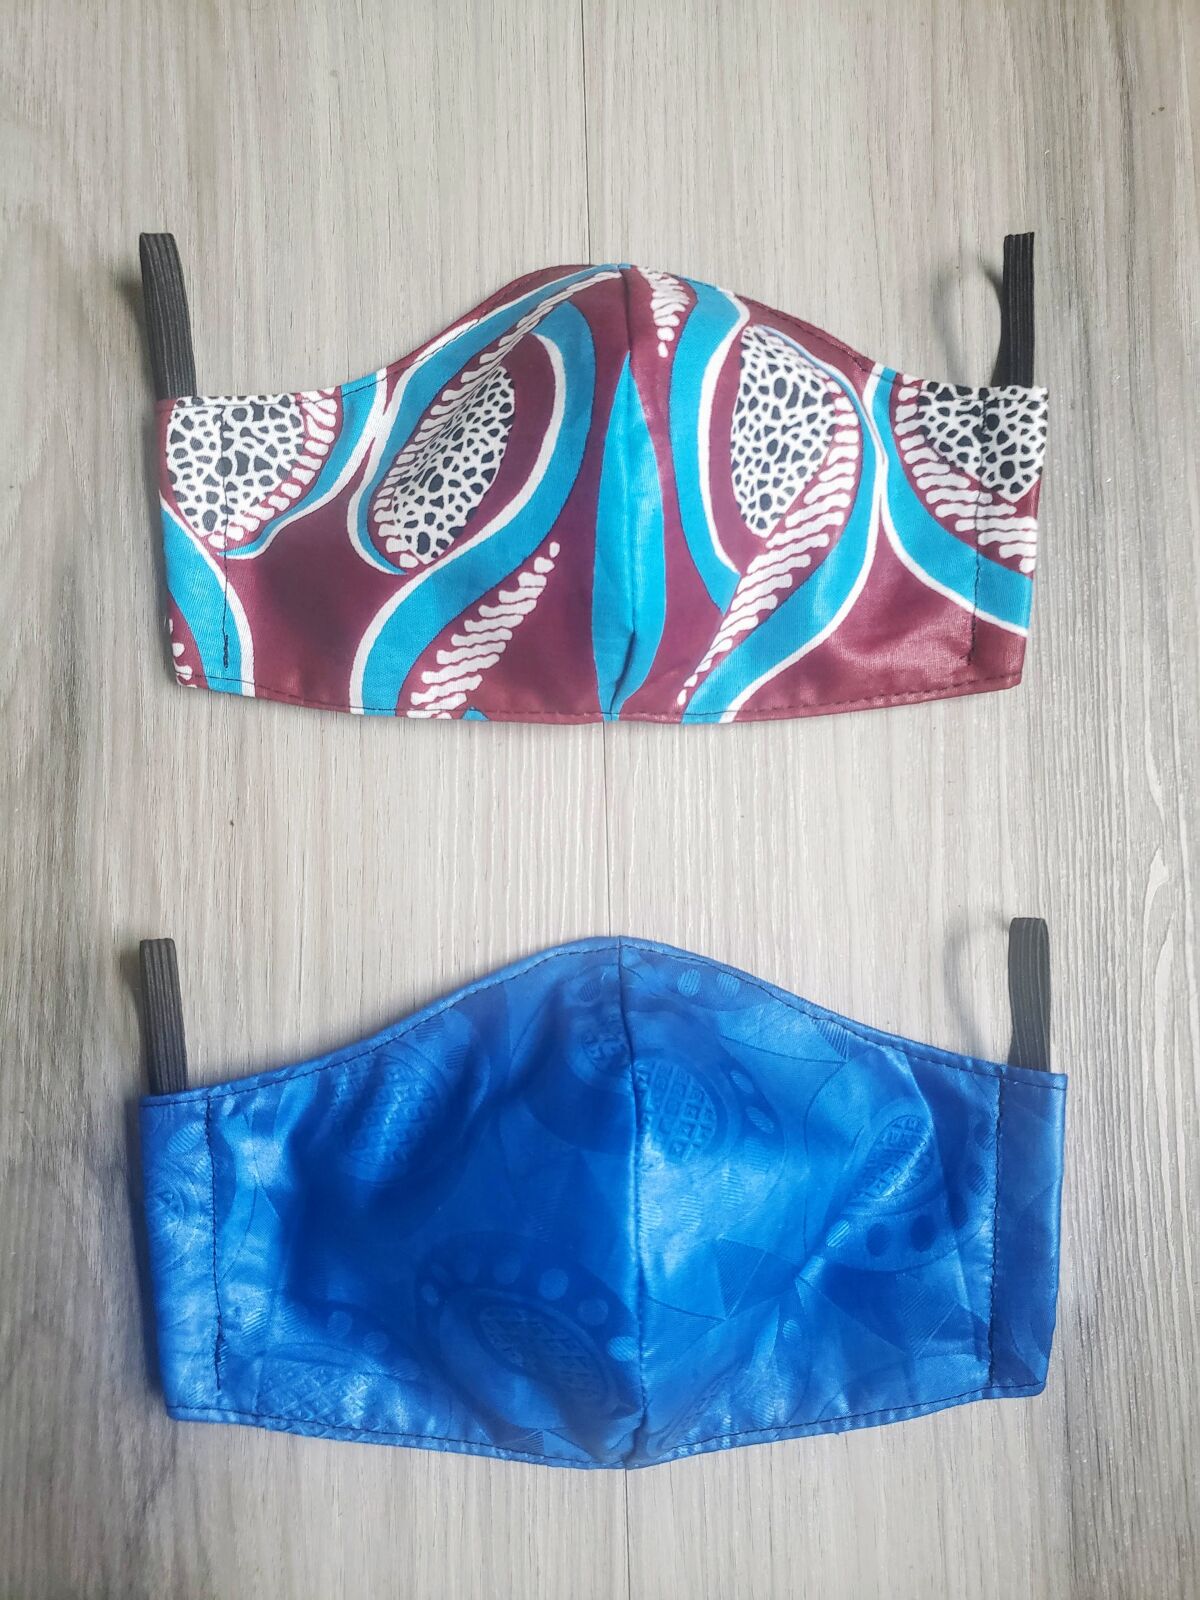 TEGAA's face masks in Maroon Swirl (above) and Royal Blue (below).